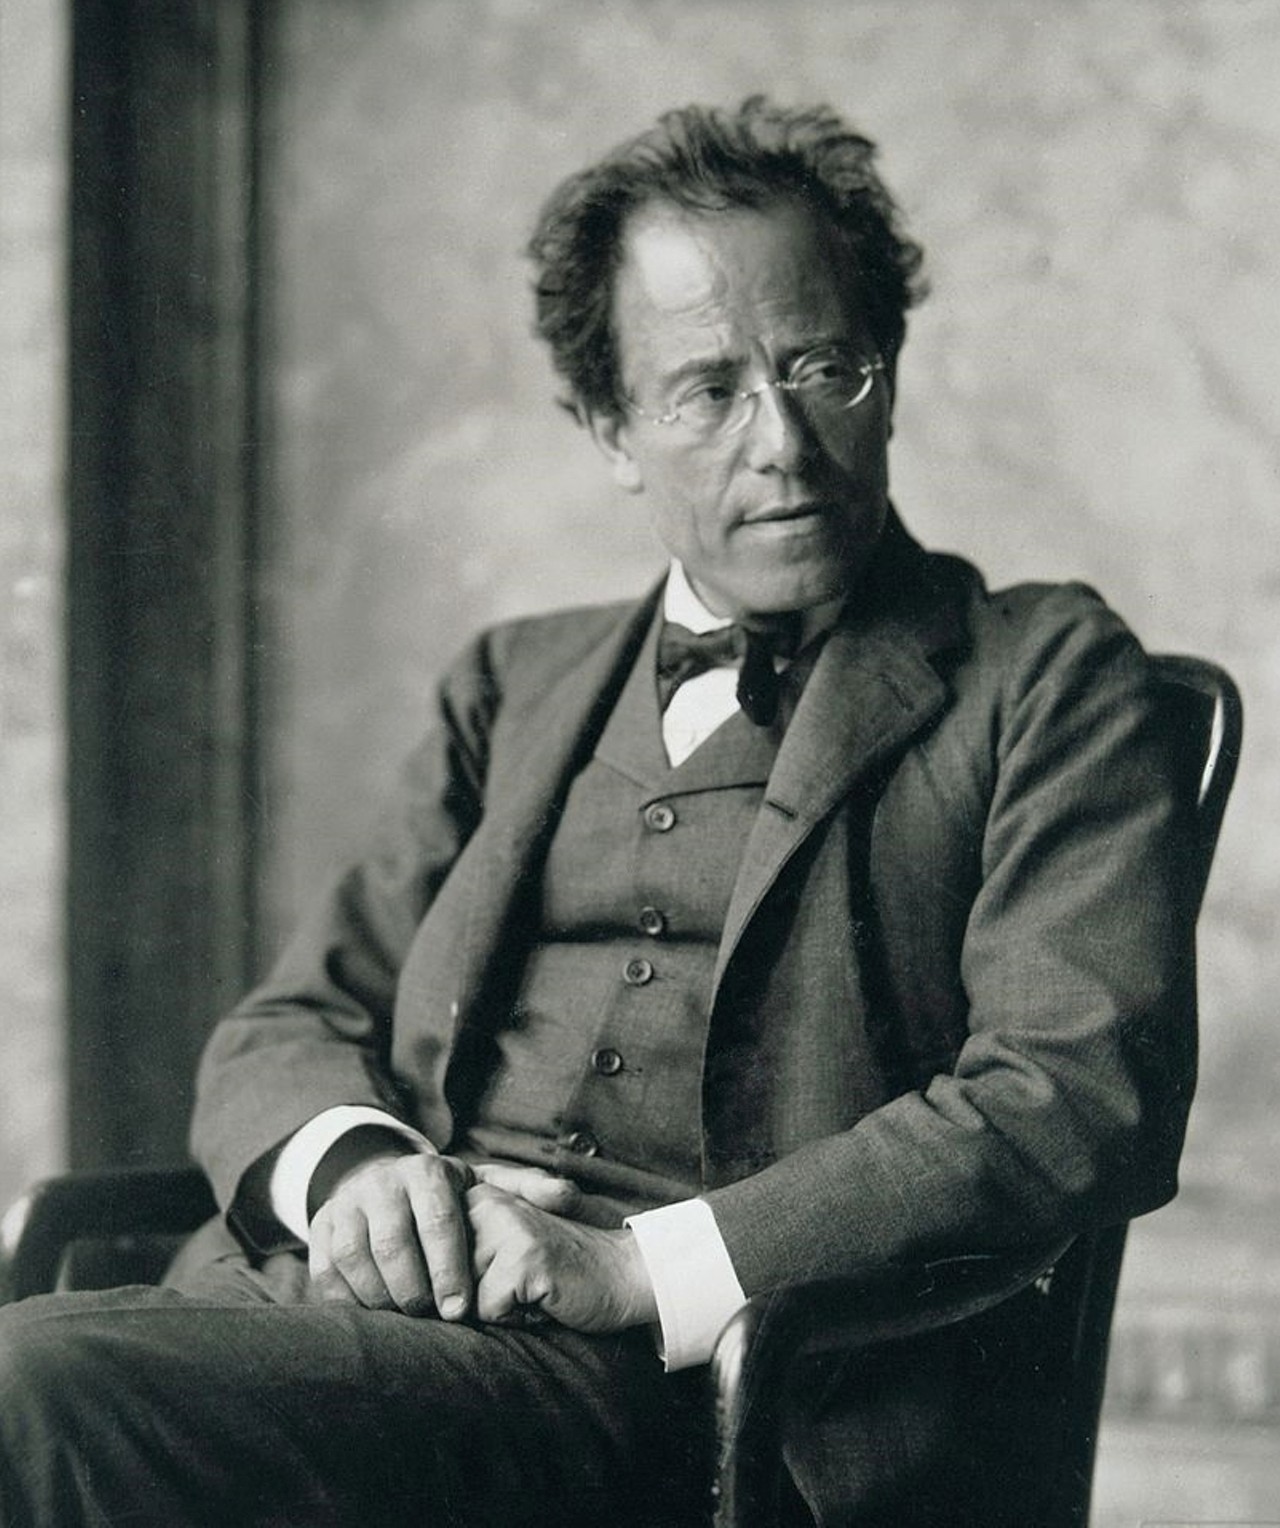 Cleveland Orchestra plays Mahler's Fifth 
Thu, Sept. 26, Sat, Sept. 28
Photo via Wikimedia Commons